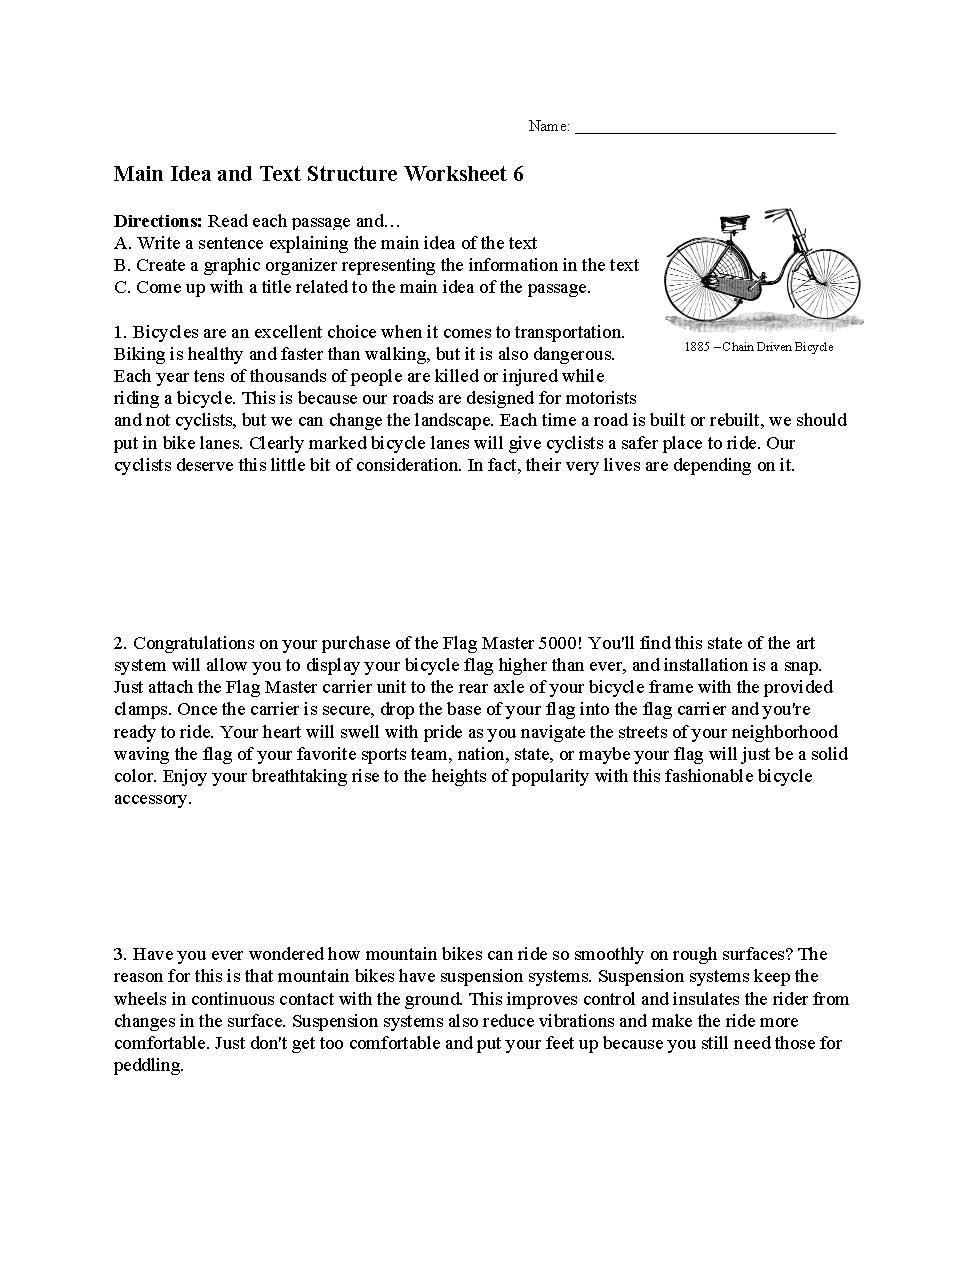 This is a preview image of the Main Idea and Text Structure Worksheet 6.